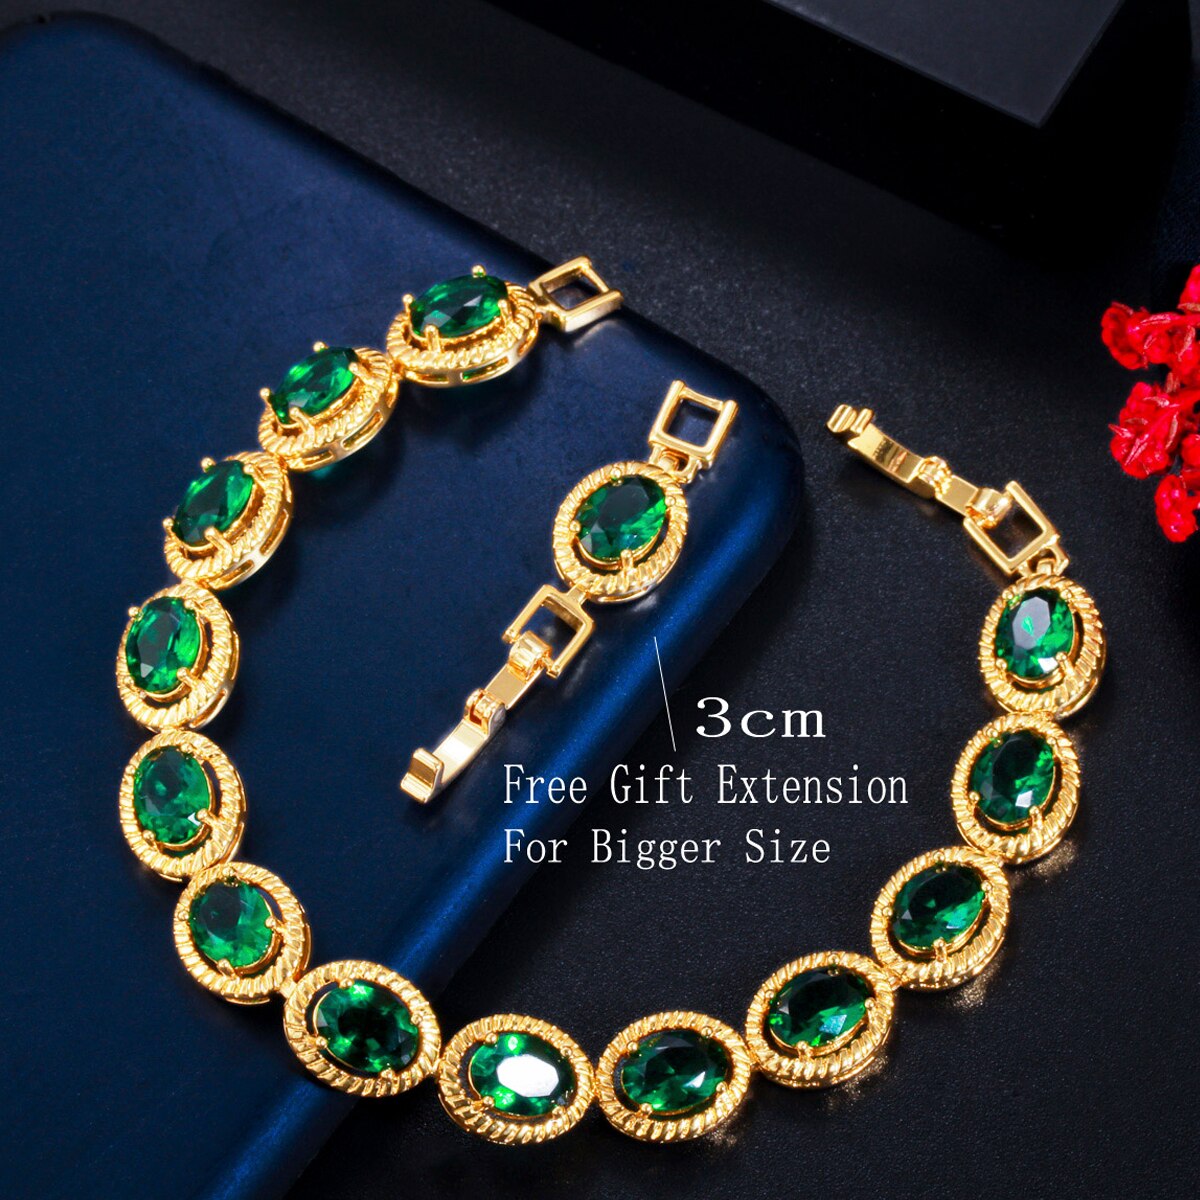 ThreeGraces-Gorgeous-Nigerian-Gold-Color-3pcs-White-Big-Round-CZ-Women-Wedding-Party-Necklace-Earrin-1005001603867521-4